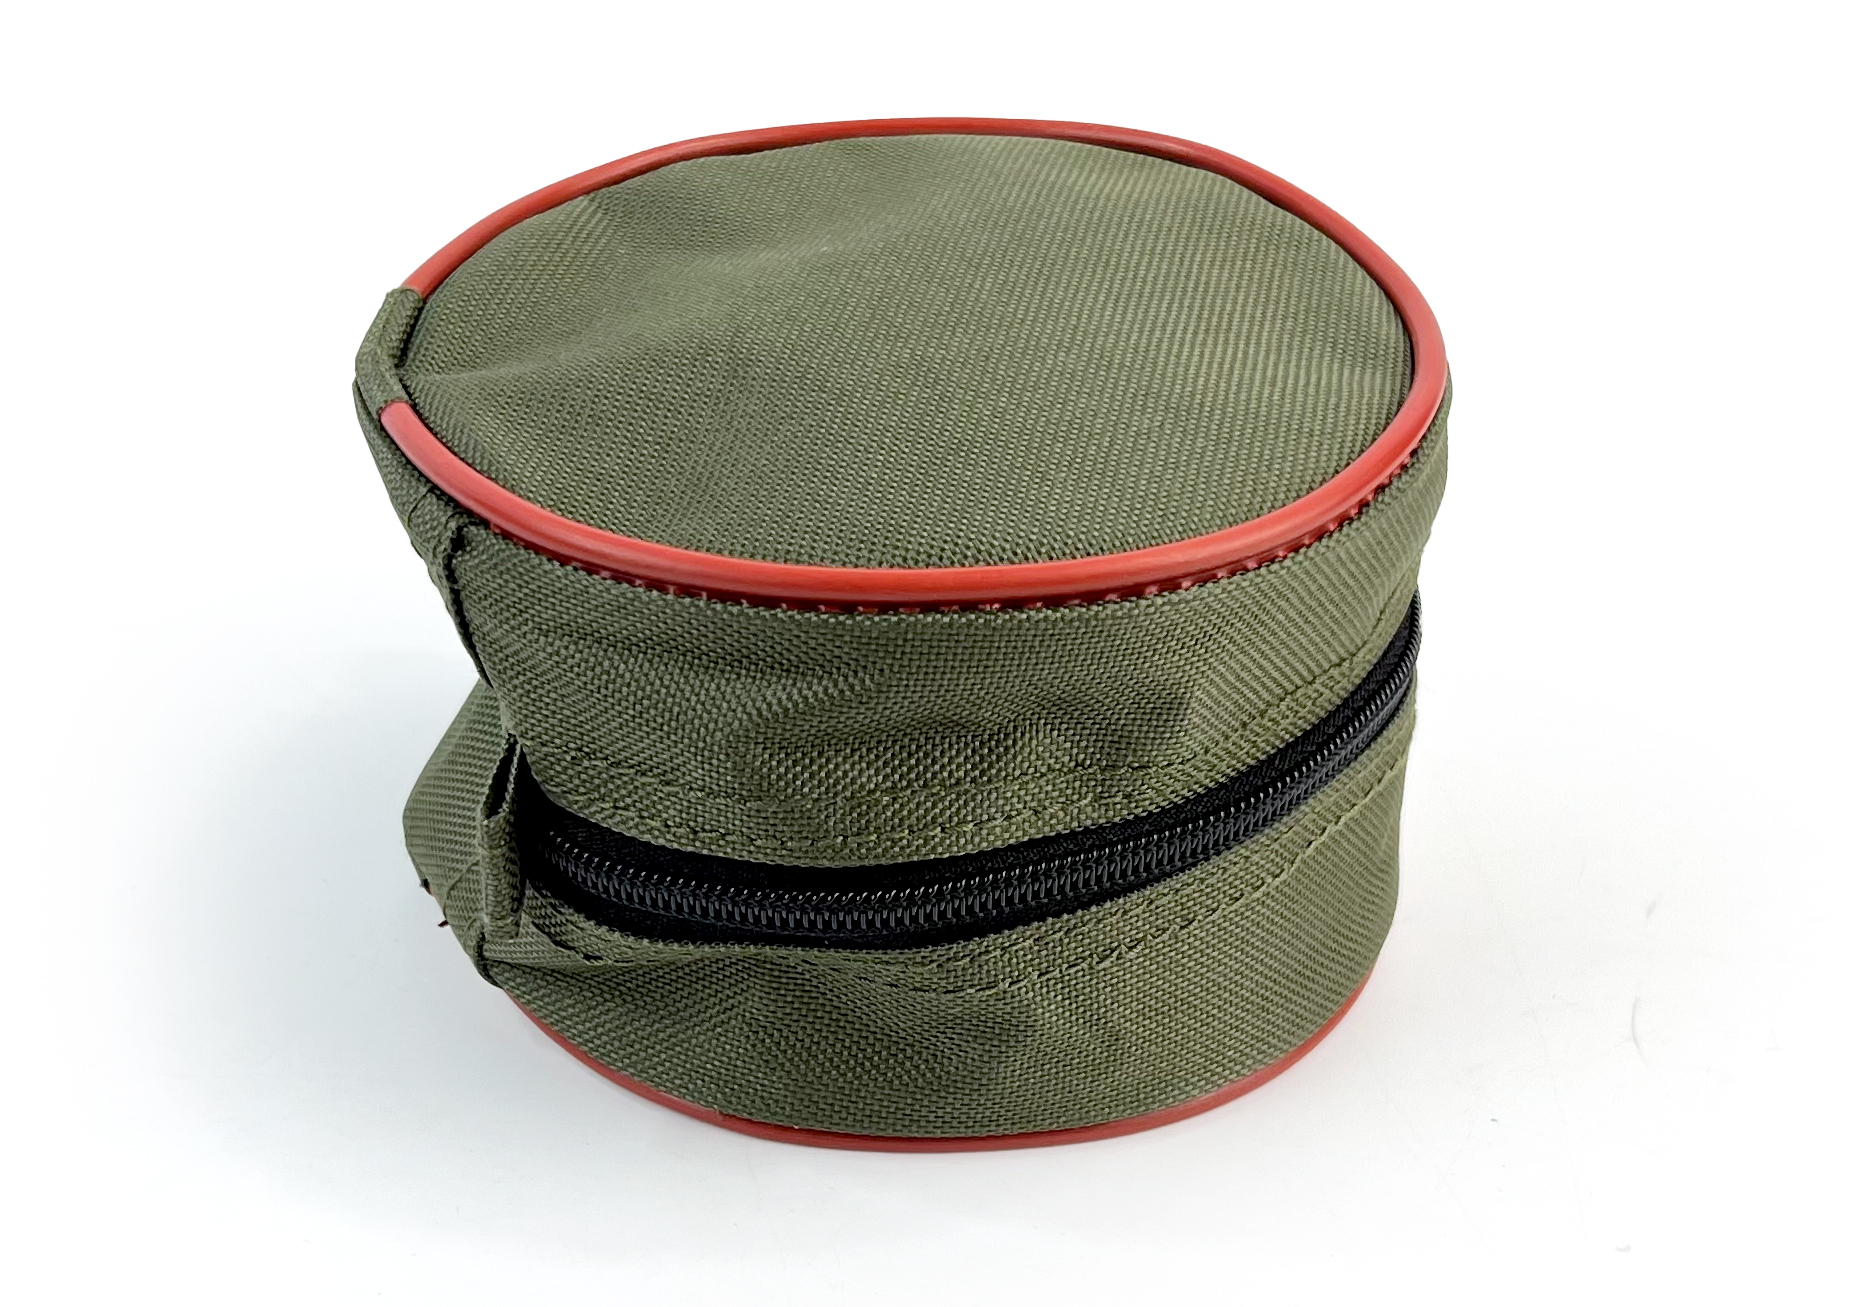 Stillwater Classic Fly Reel Case: Small